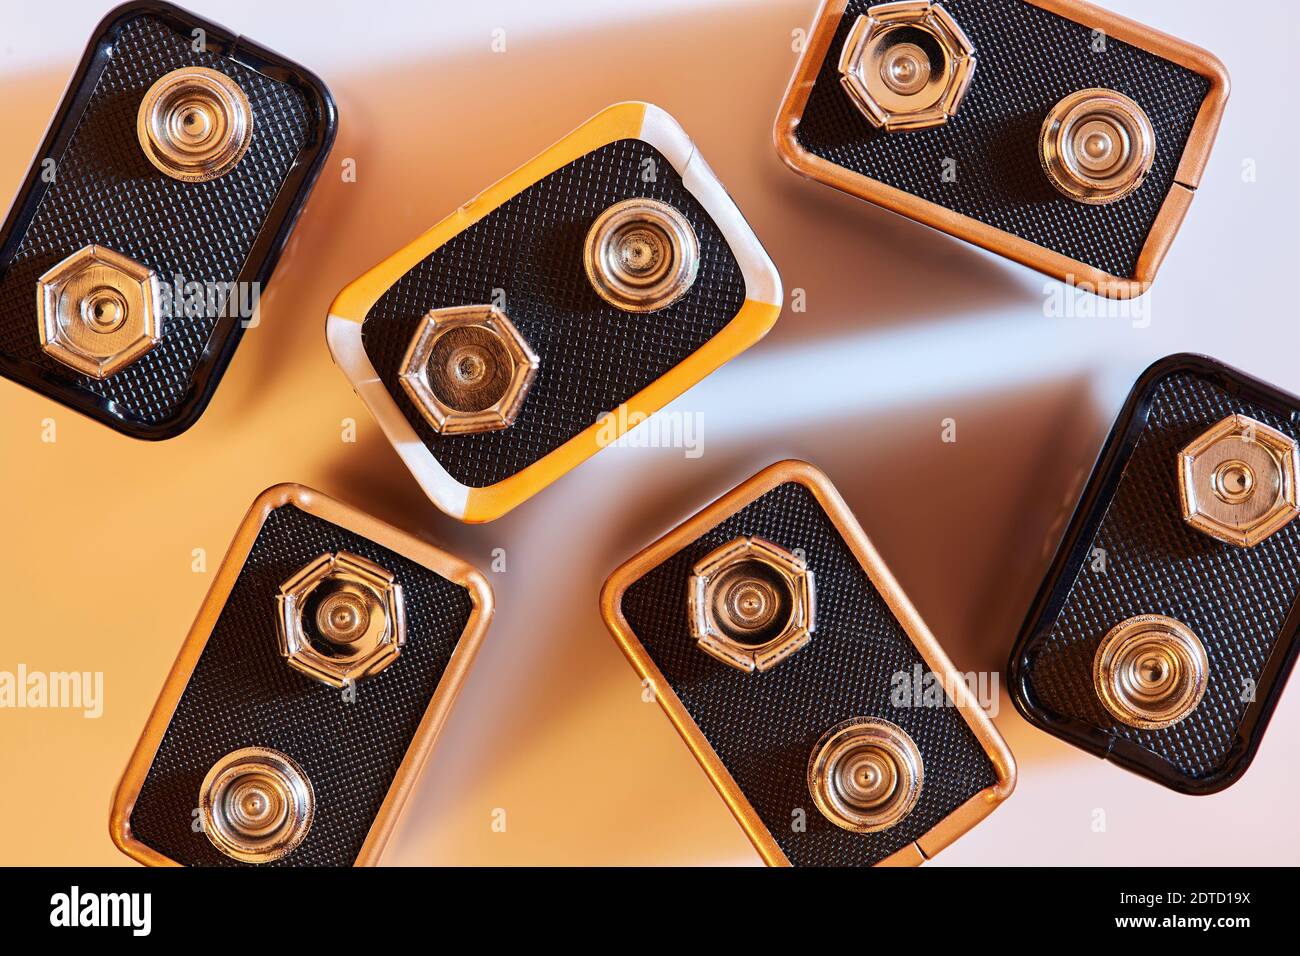 Batteries on white background Stock Photo